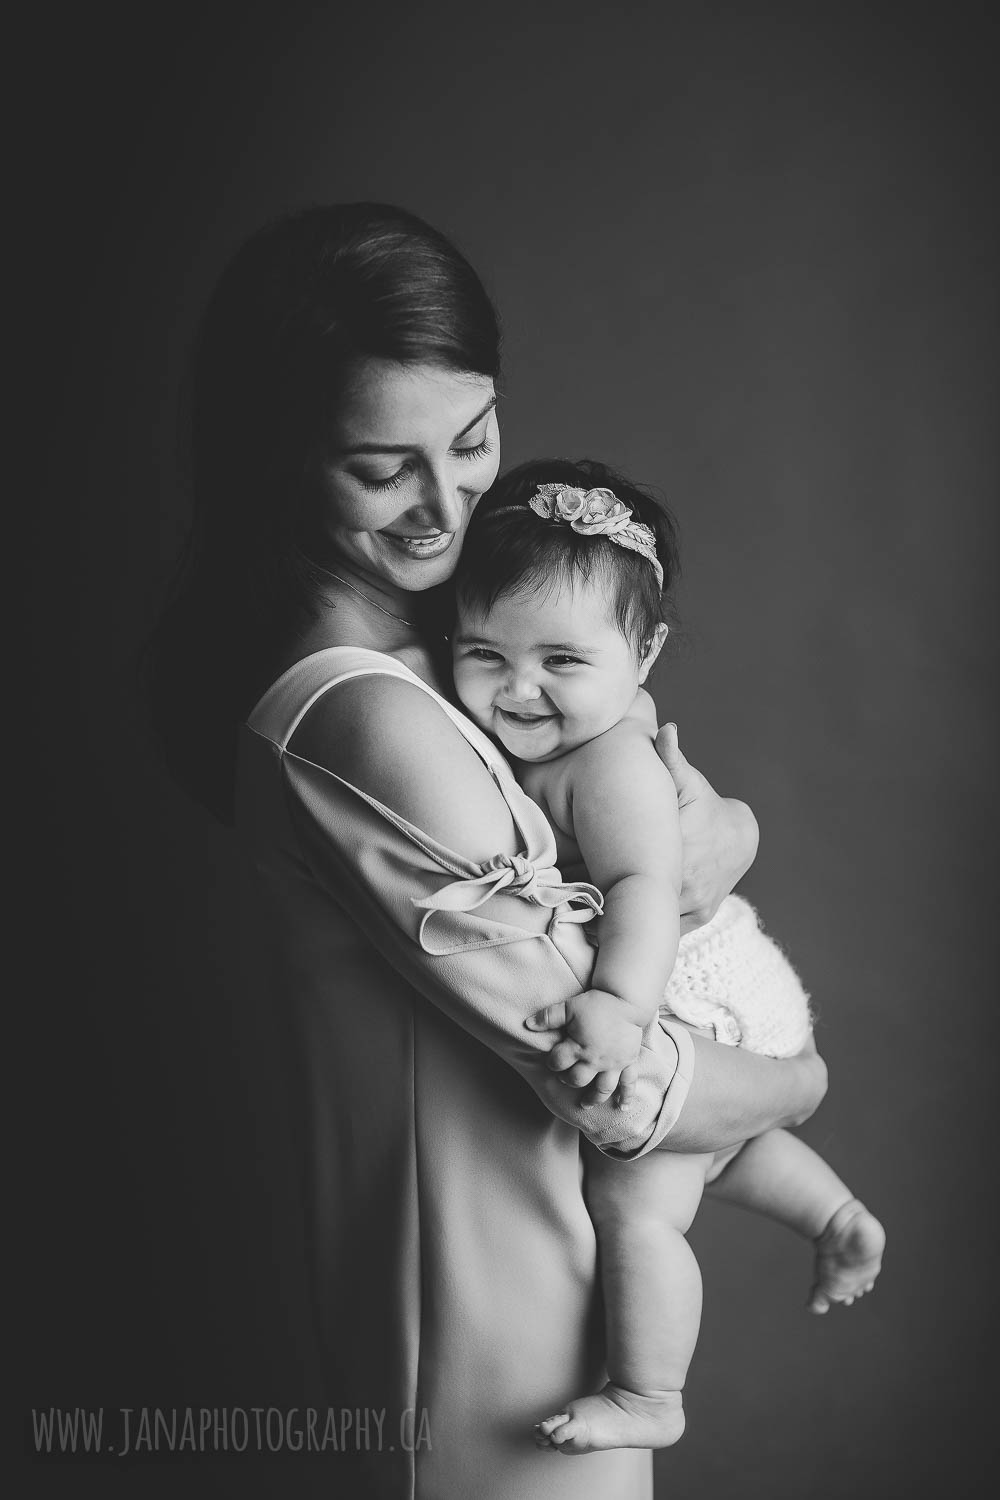 Mom is holding baby girl smiling in a black and white picture